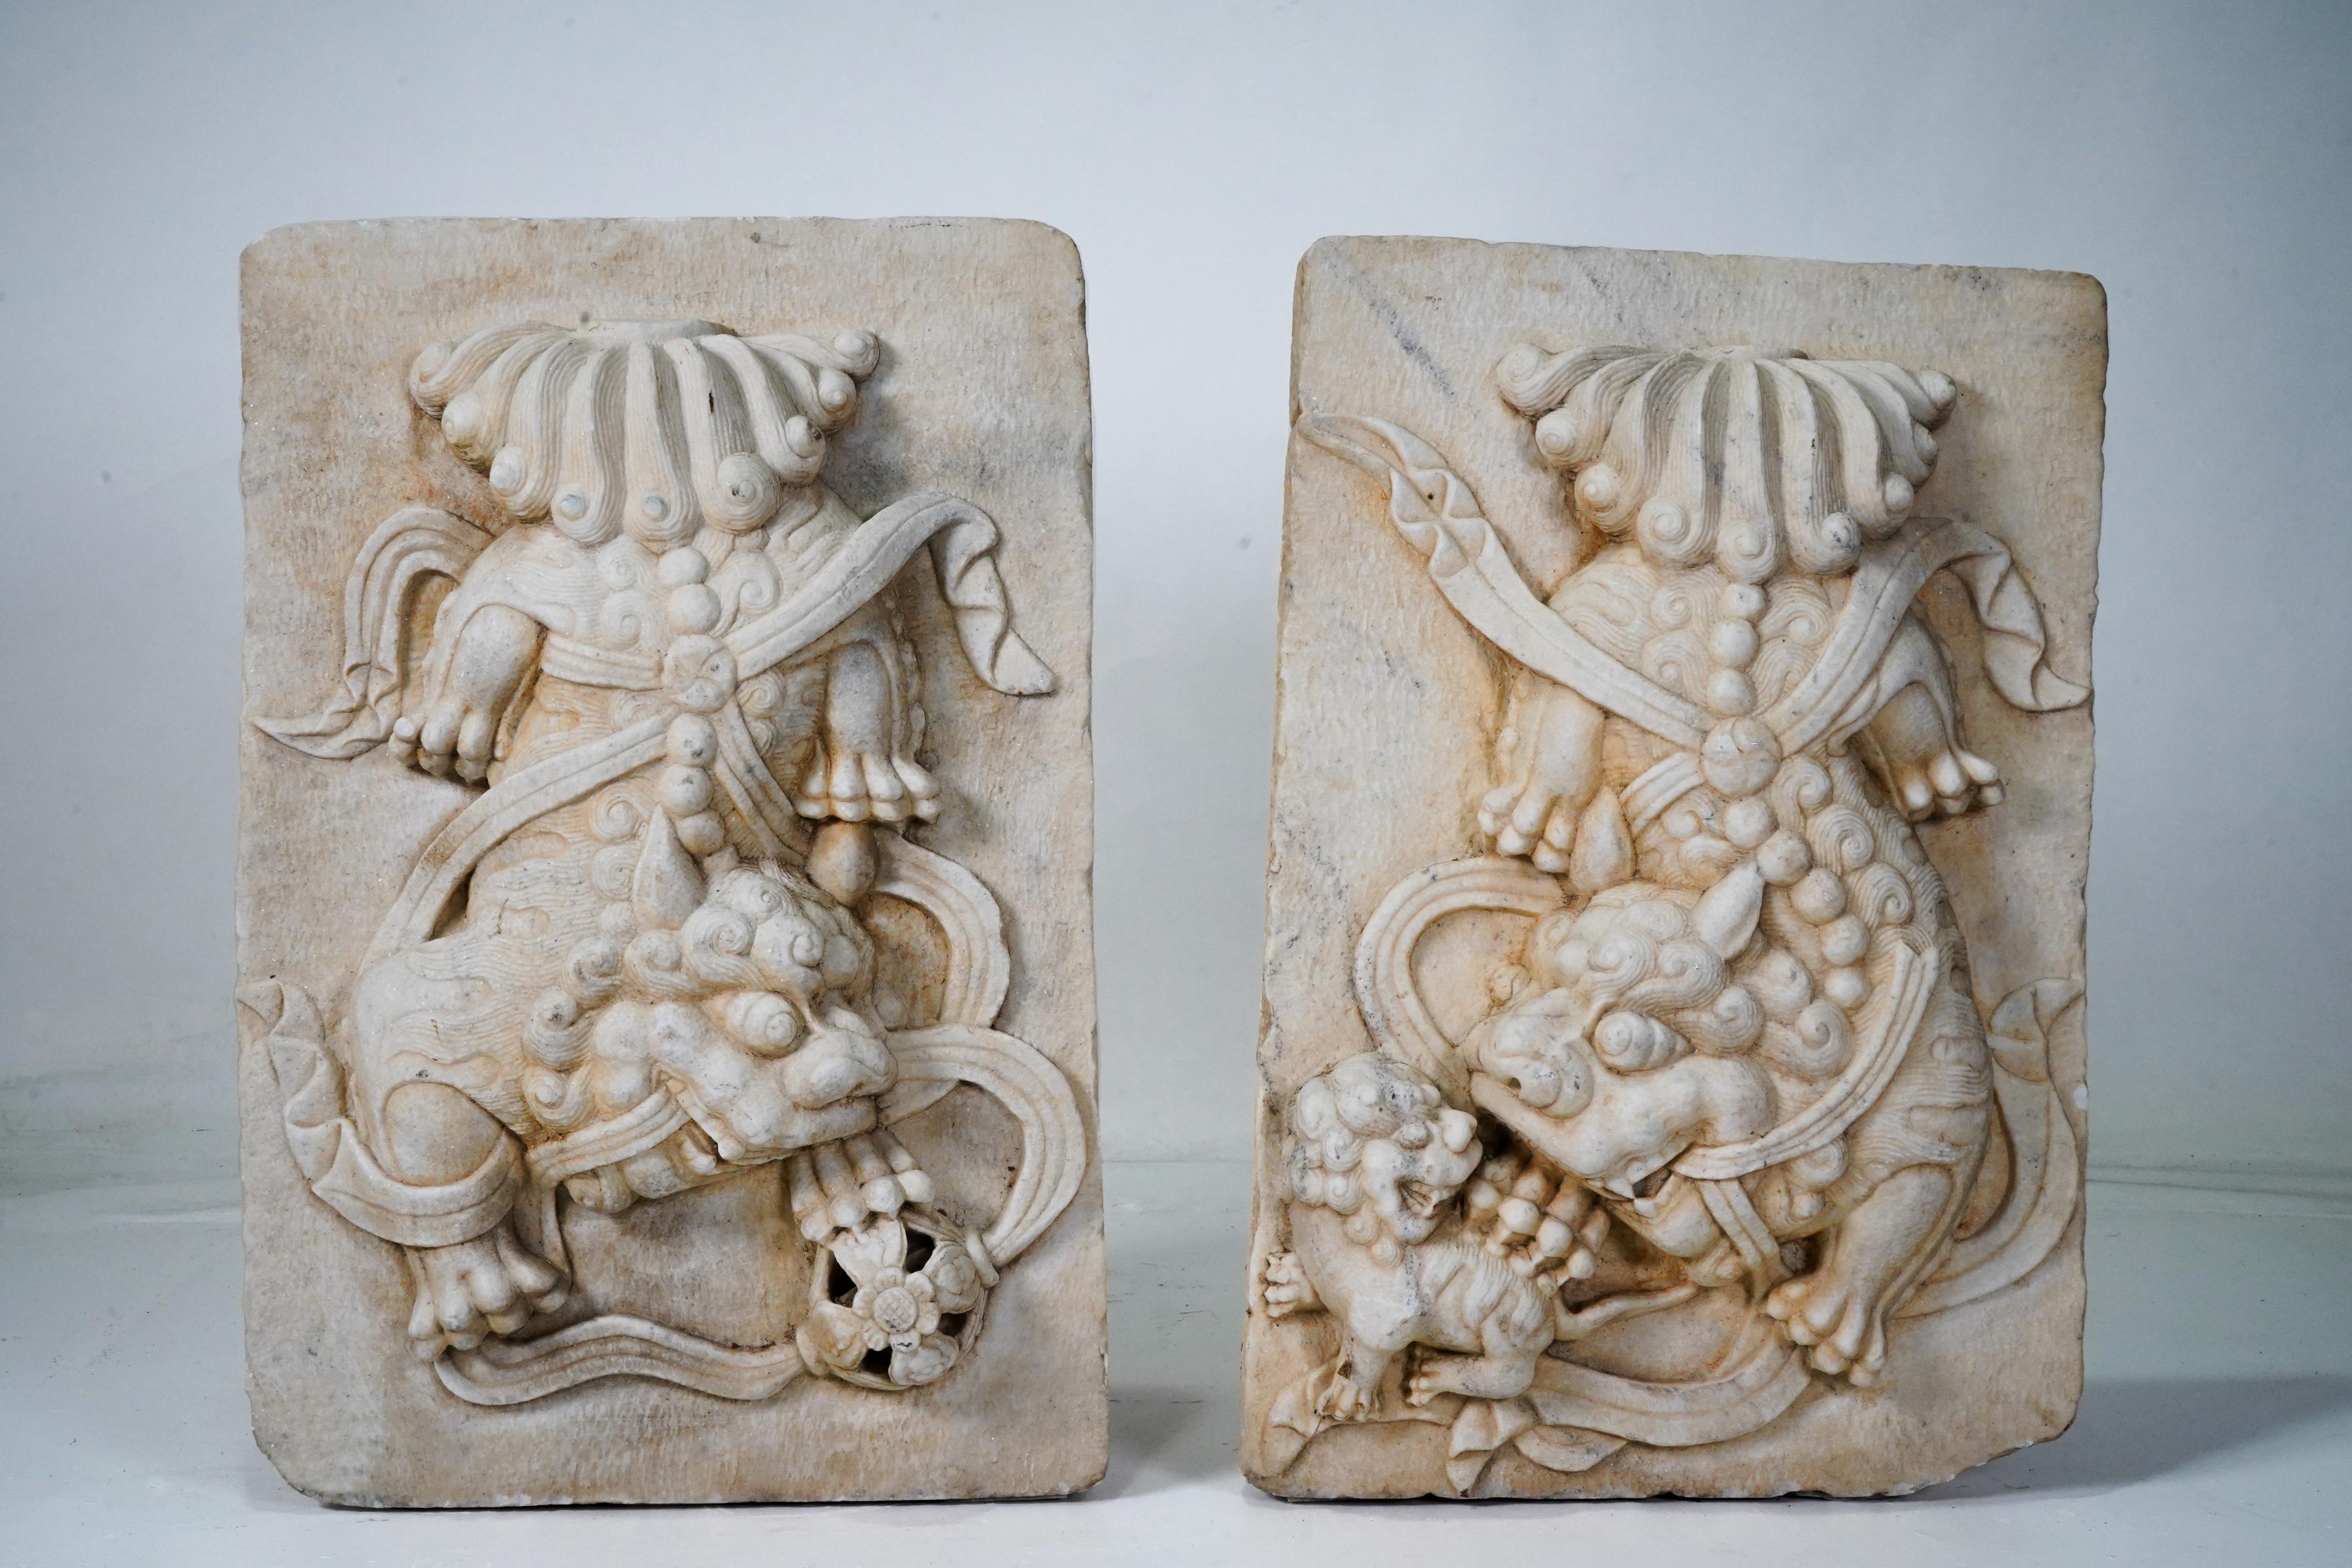 This set of  exquisitely-carved marble garden plaques features two fu dogs playing with ribbons. The female fu dog (or fu lion) guards her pup while the male toys with a ball, which represents the world.   The plaques have a joyful energy that